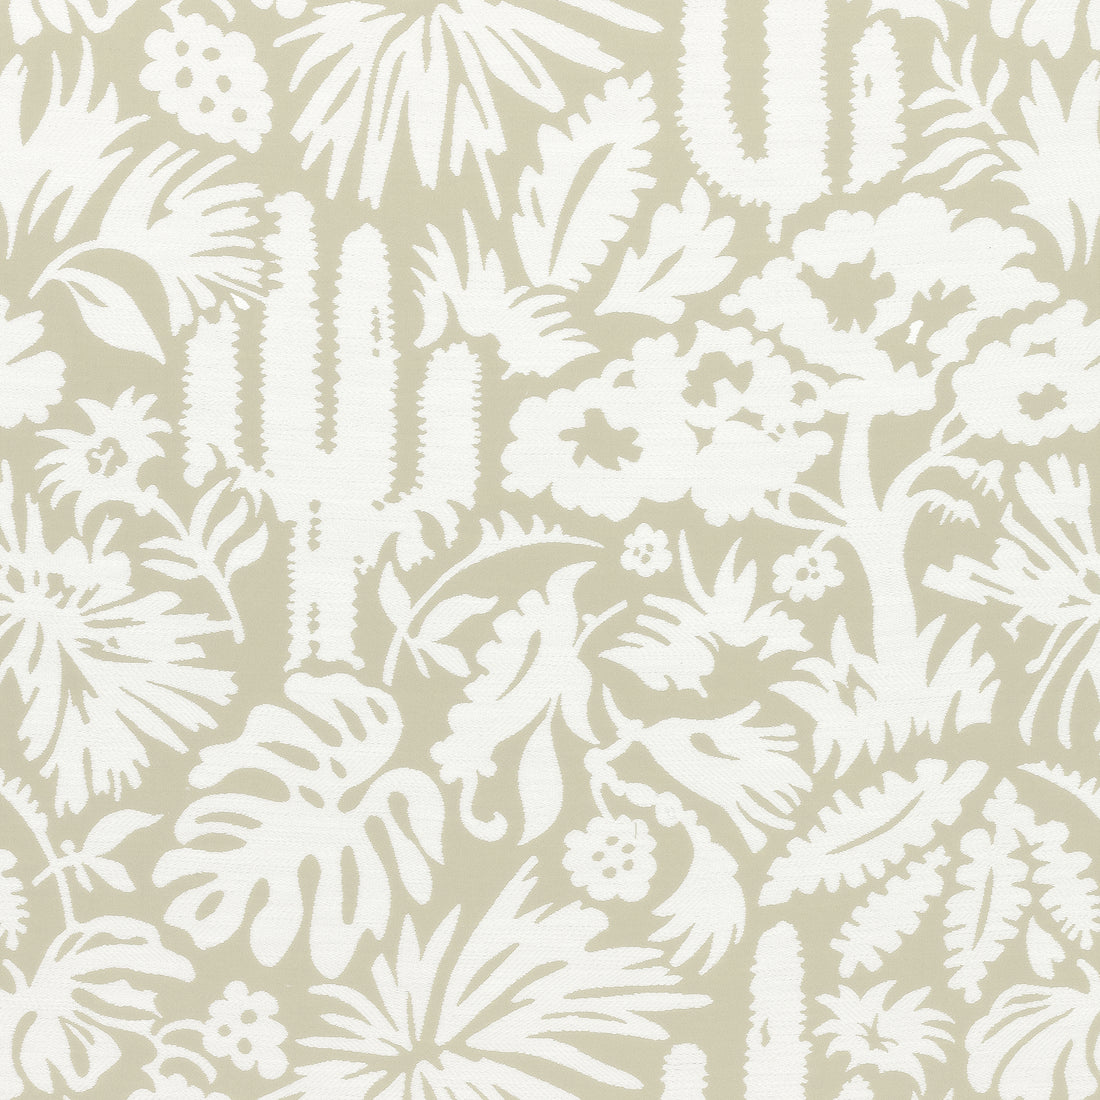 Botanica fabric in sand color - pattern number W74626 - by Thibaut in the Festival collection